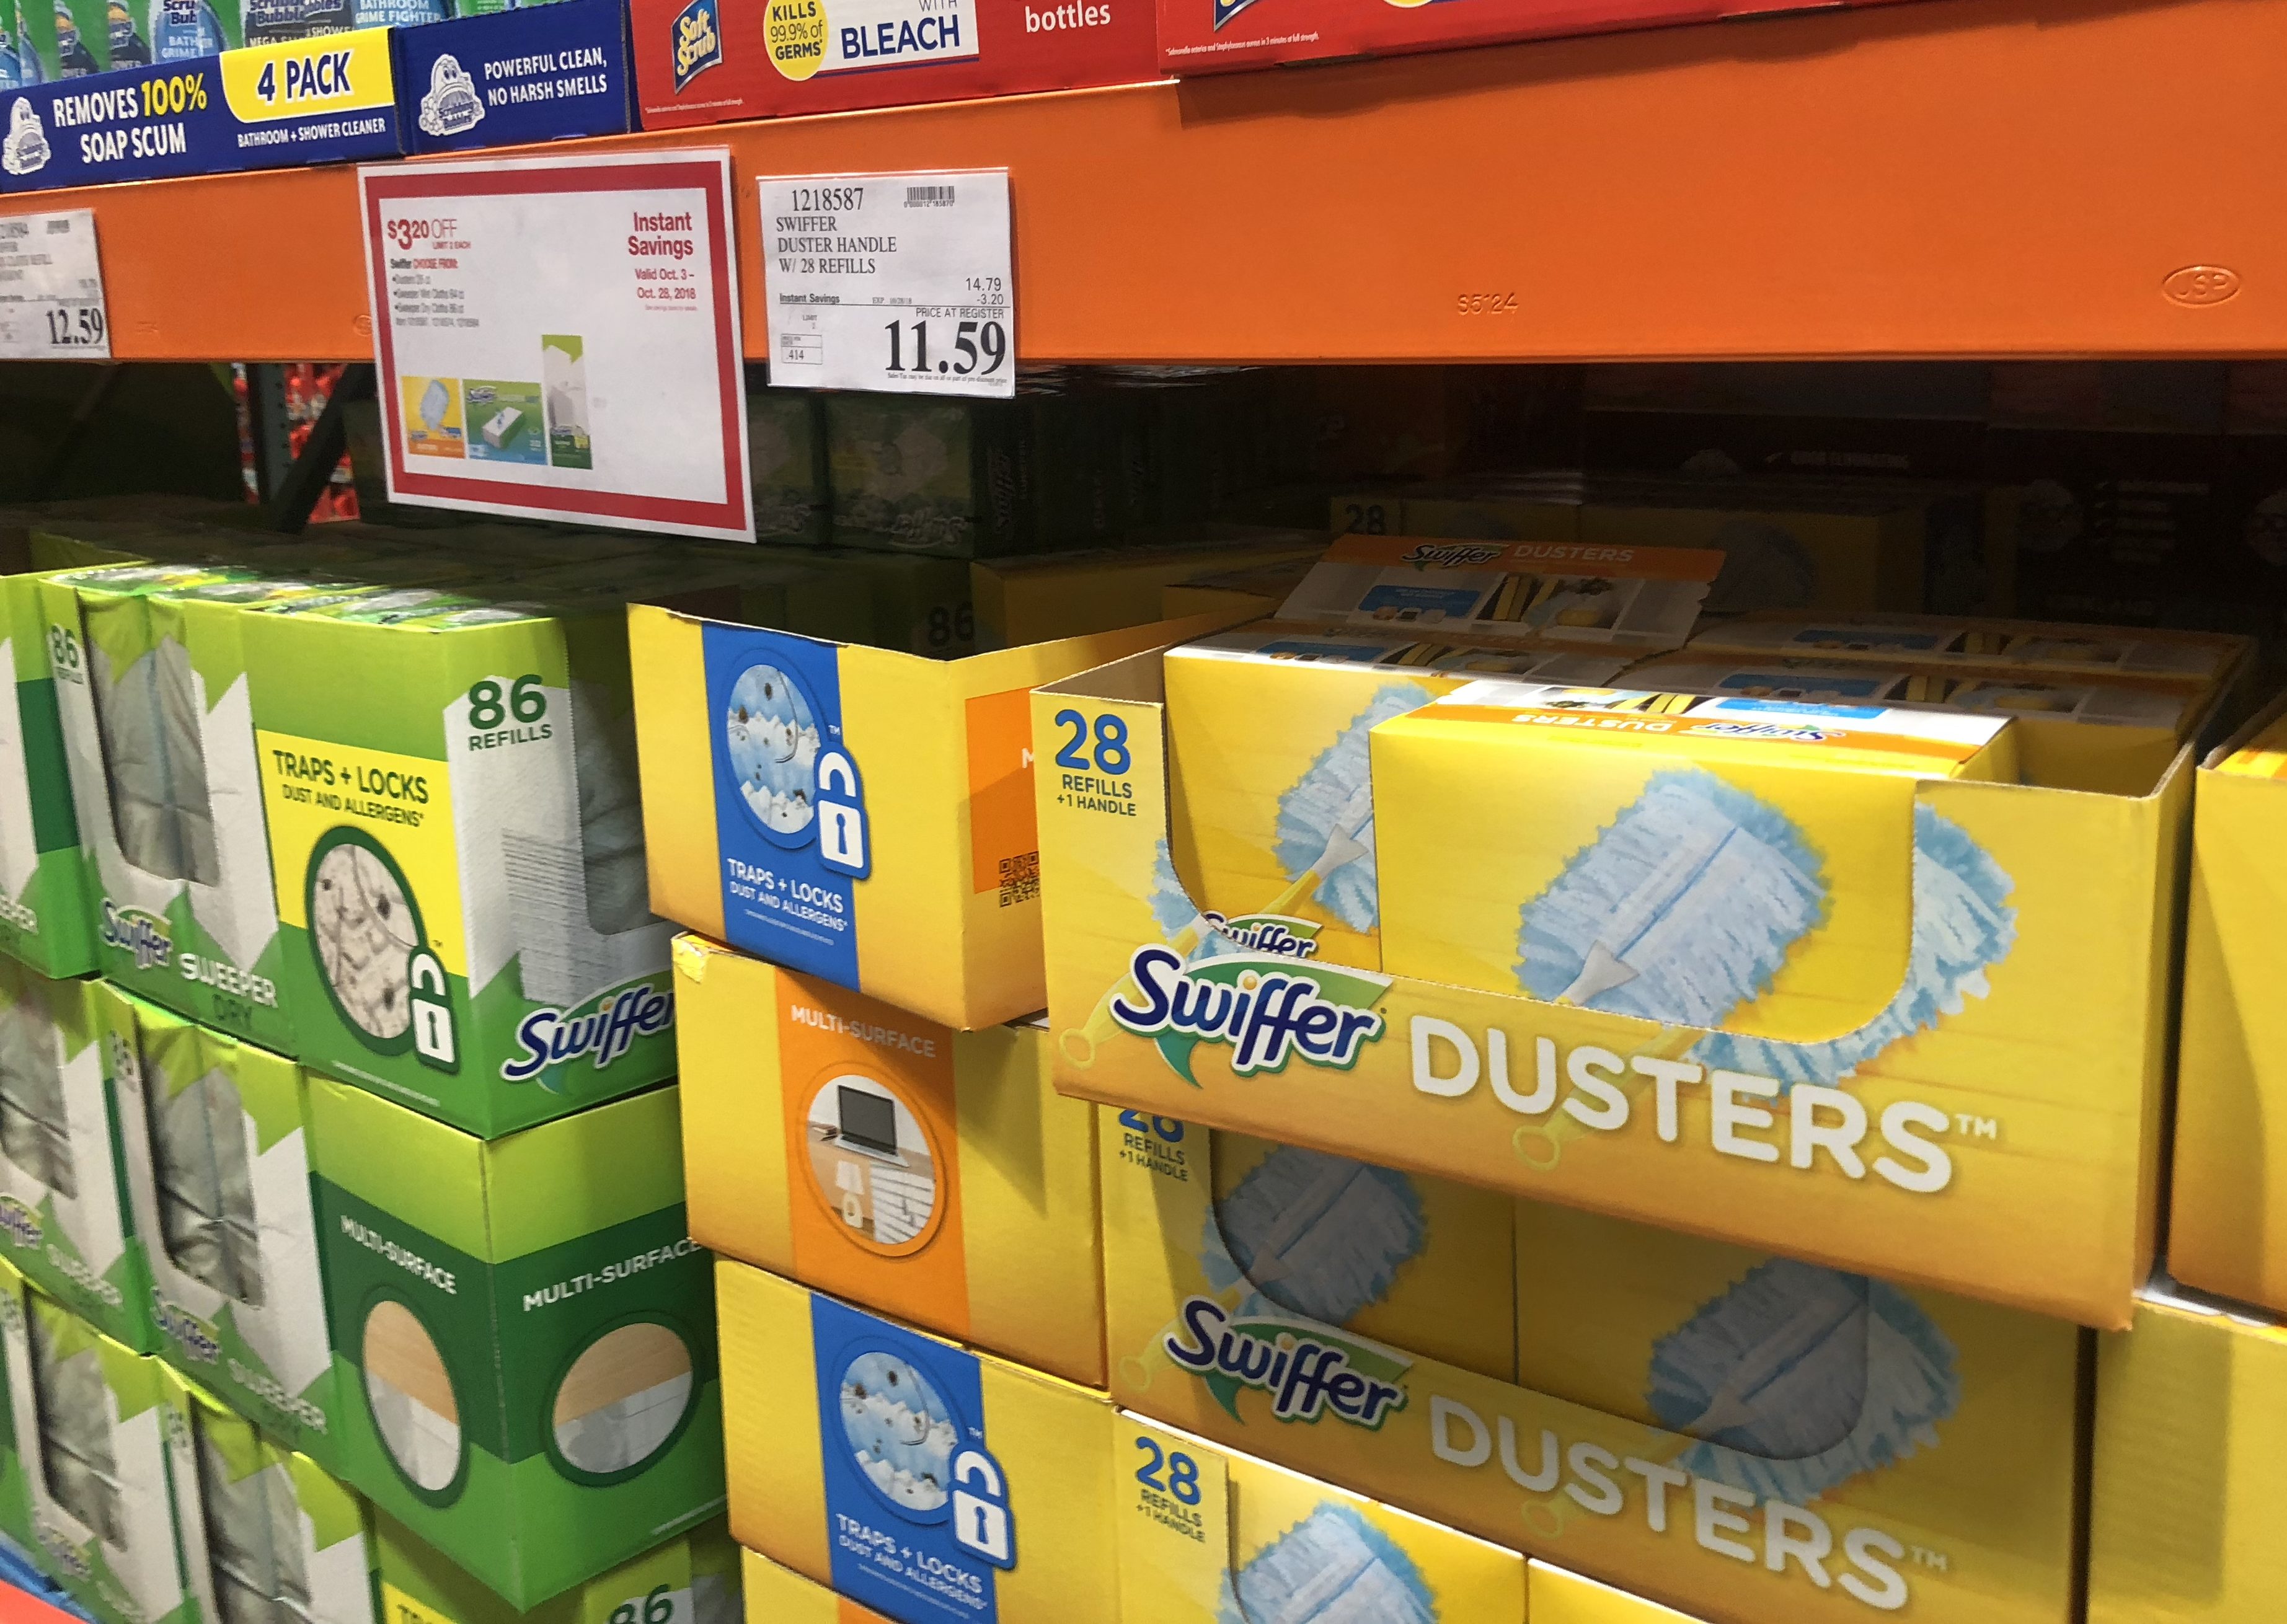 Costco deals October 2018 – Swiffer products at Costco